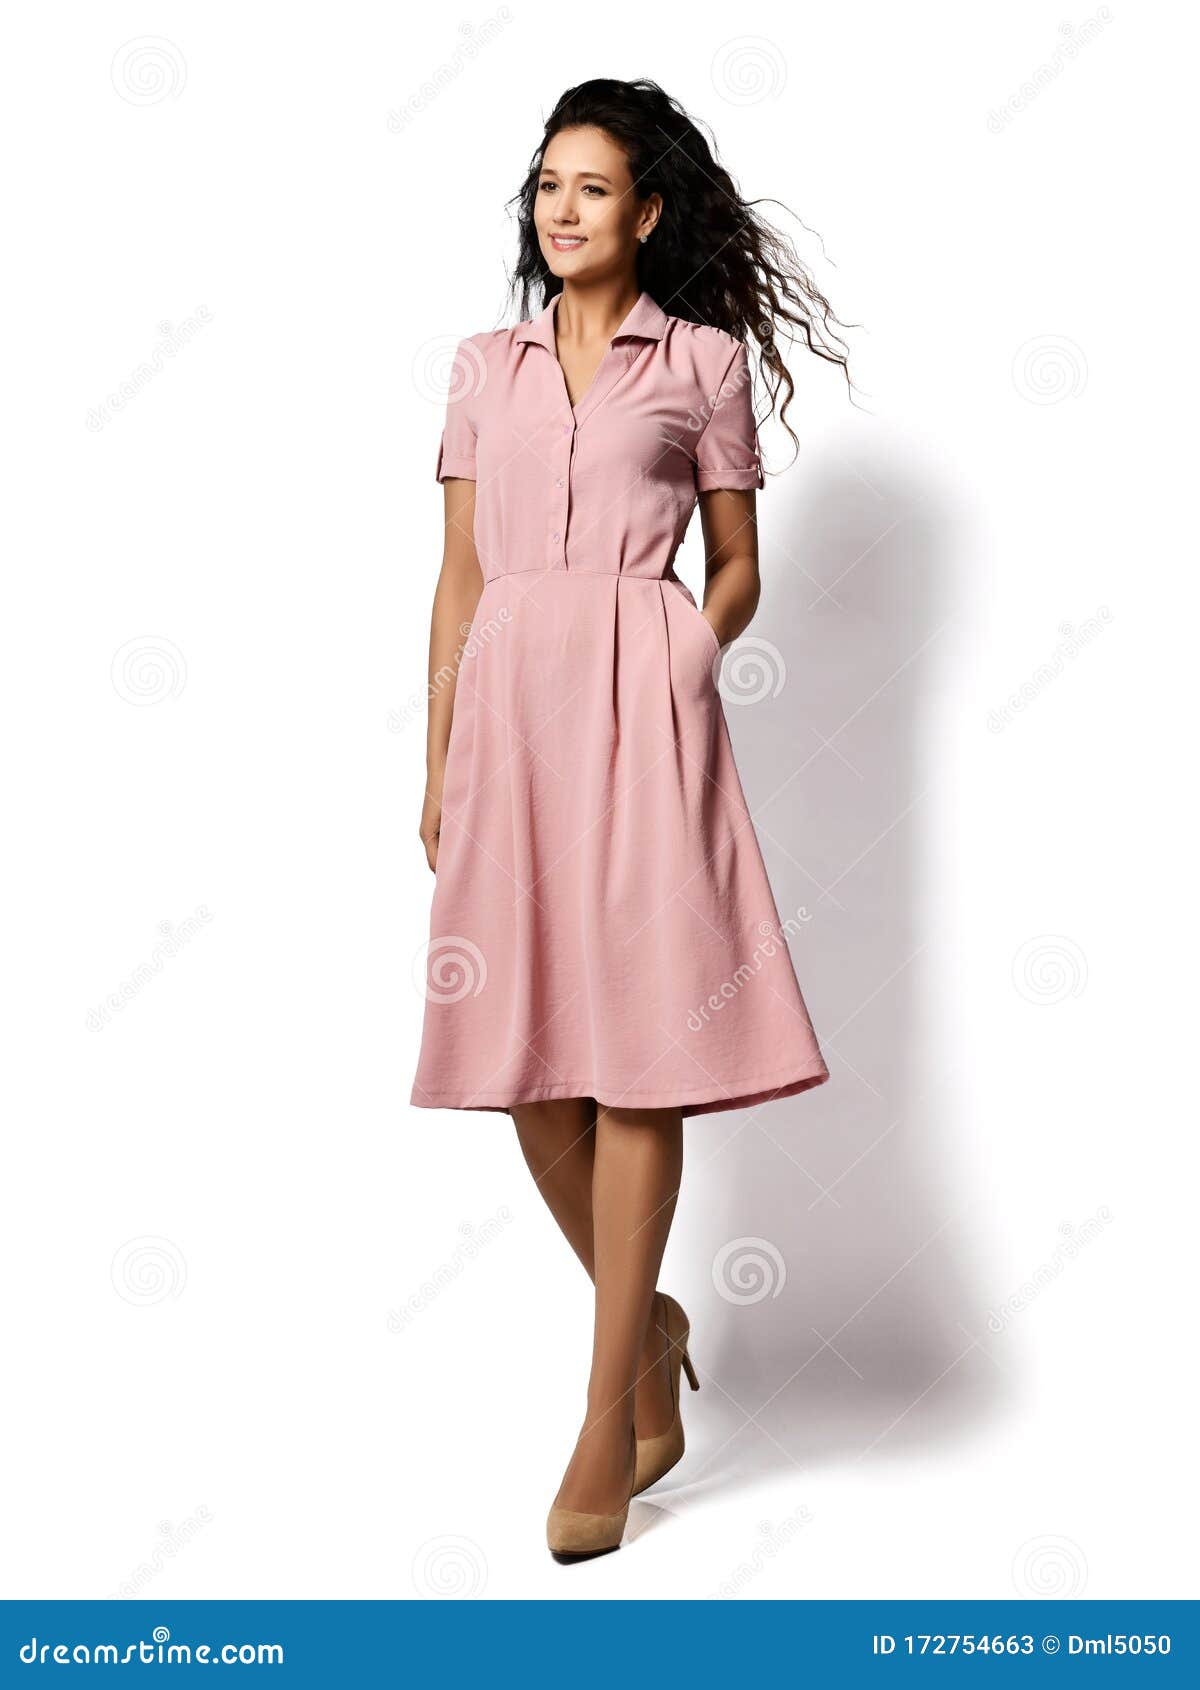 Young Beautiful Woman Posing in New Fashion Casual Pastel Pink Color Dress  Happy Smiling Walking Full Body Stock Image - Image of hairstyle, glamour:  172754663